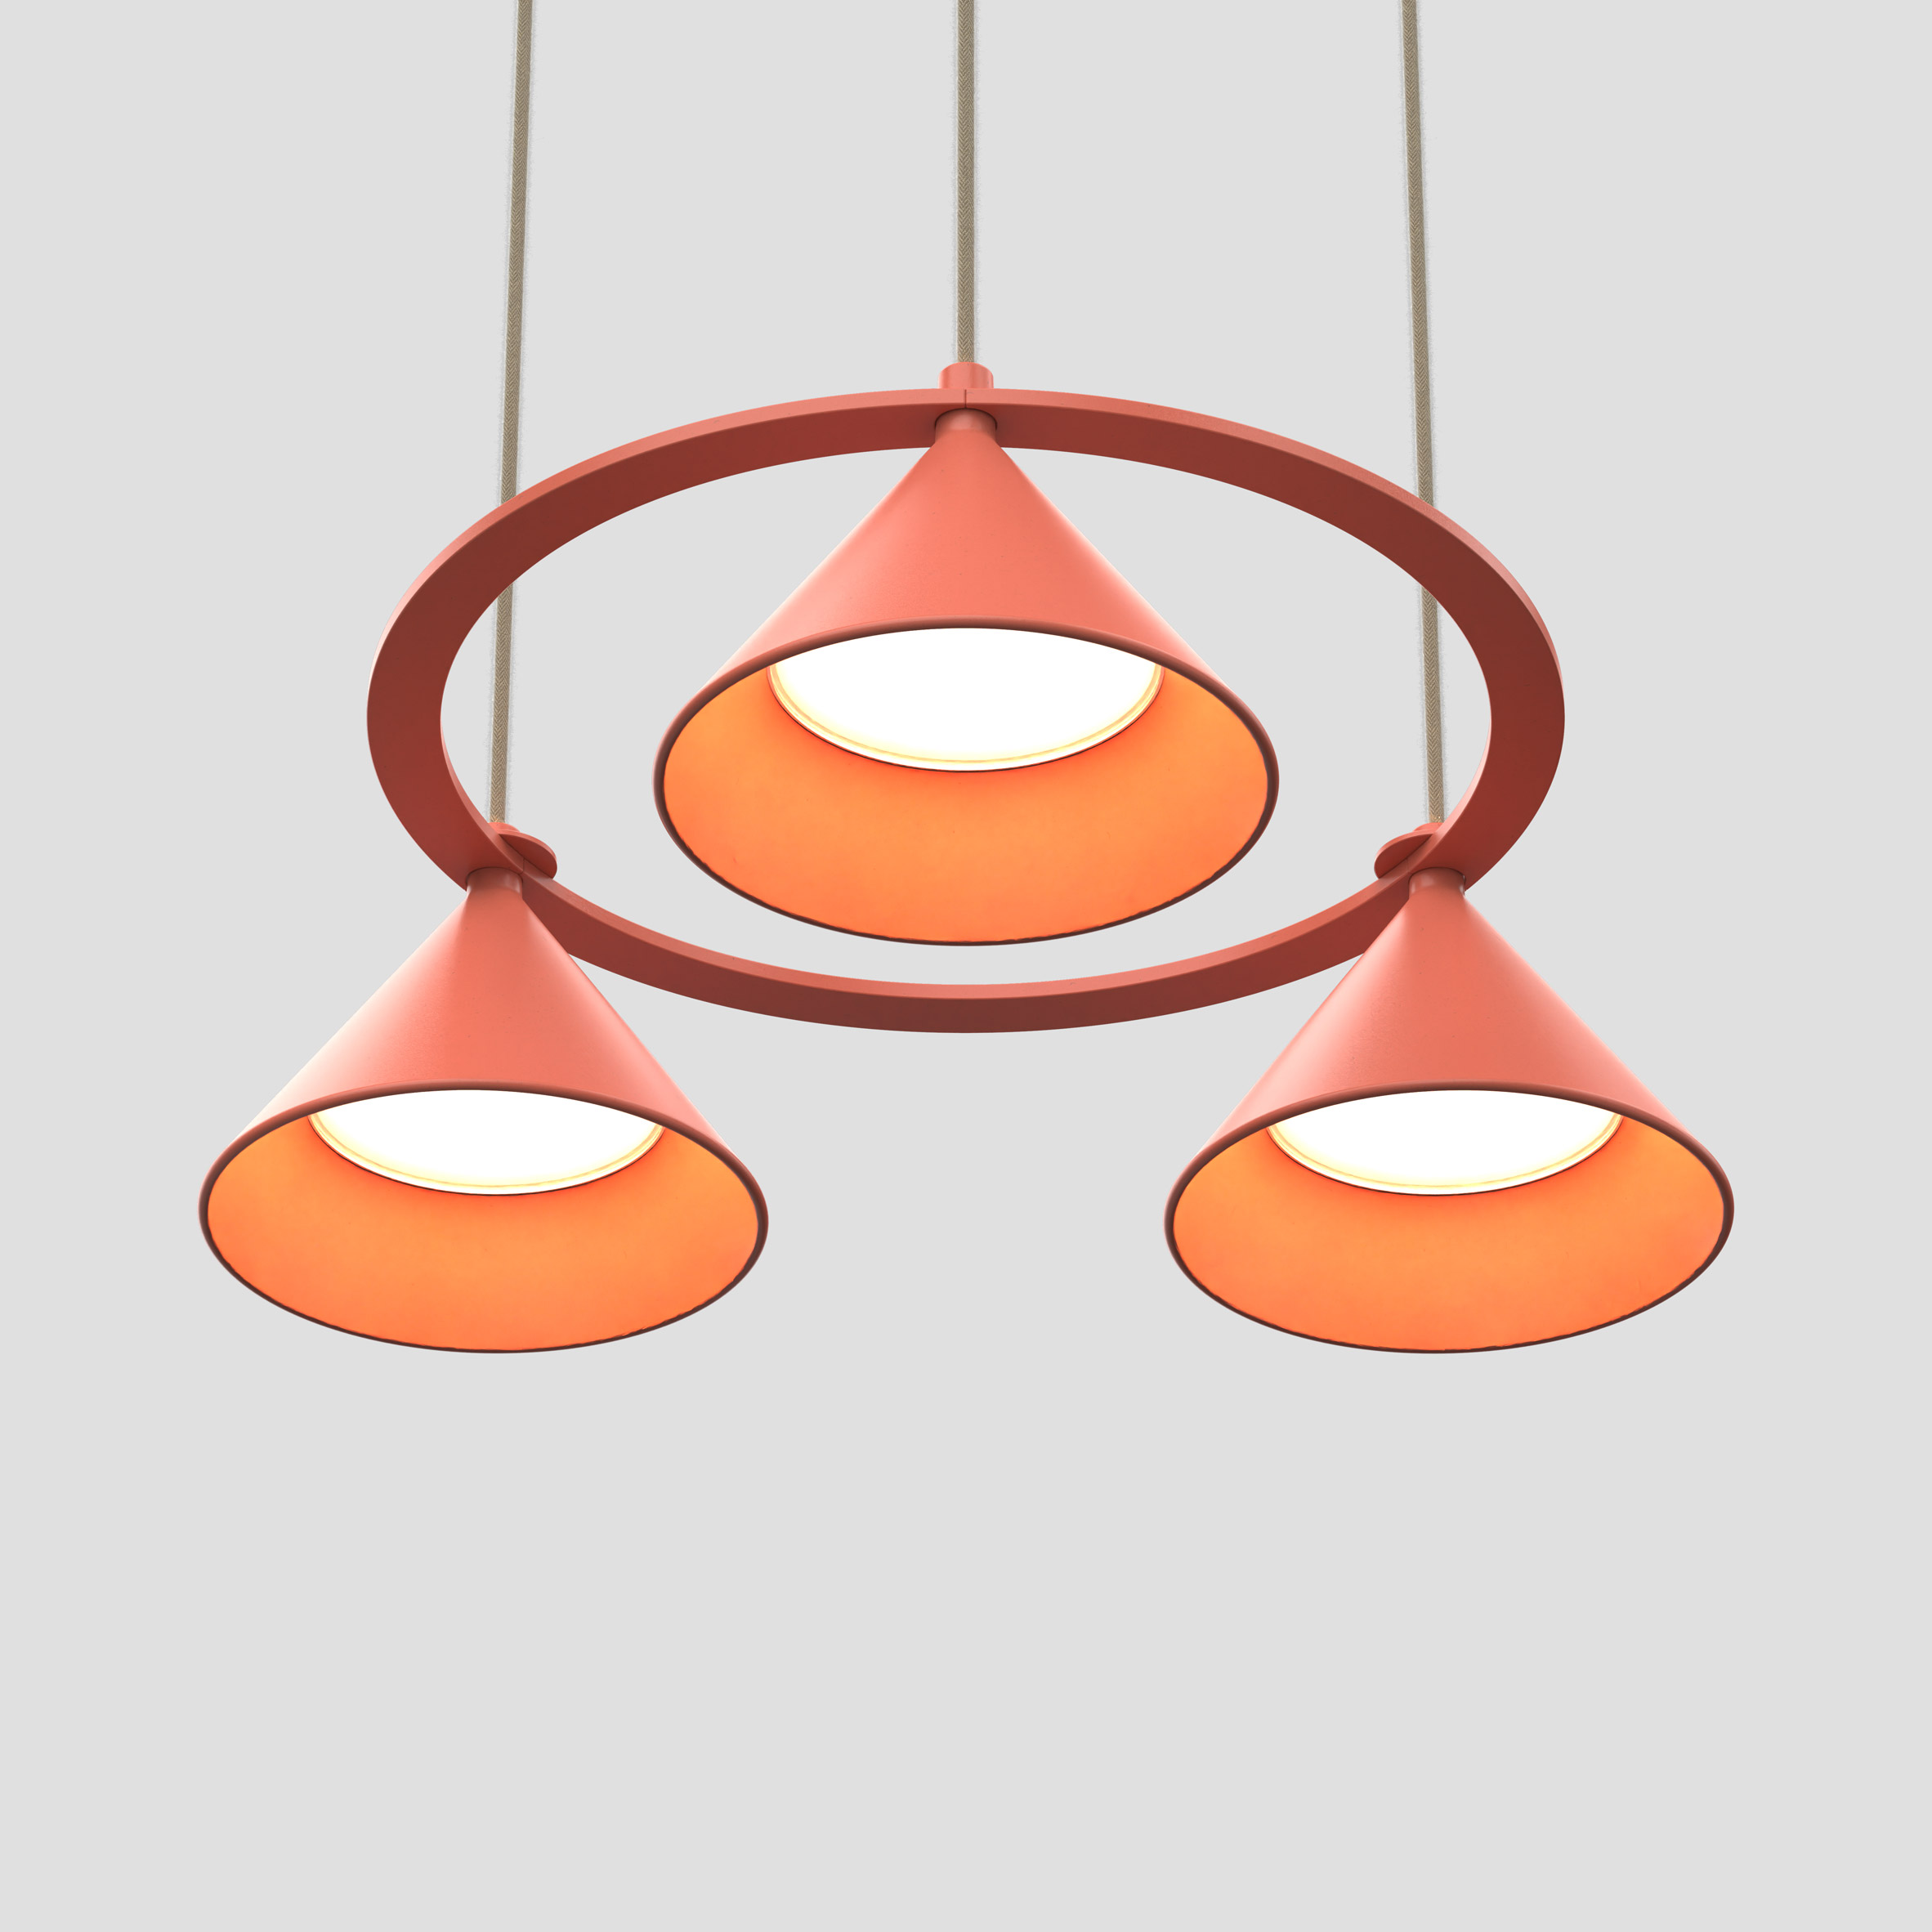 Orange Lumo pendant Lumo by Thomas Bernstrand for Zero Lighting with four conical shades in a circular mount as seen from below